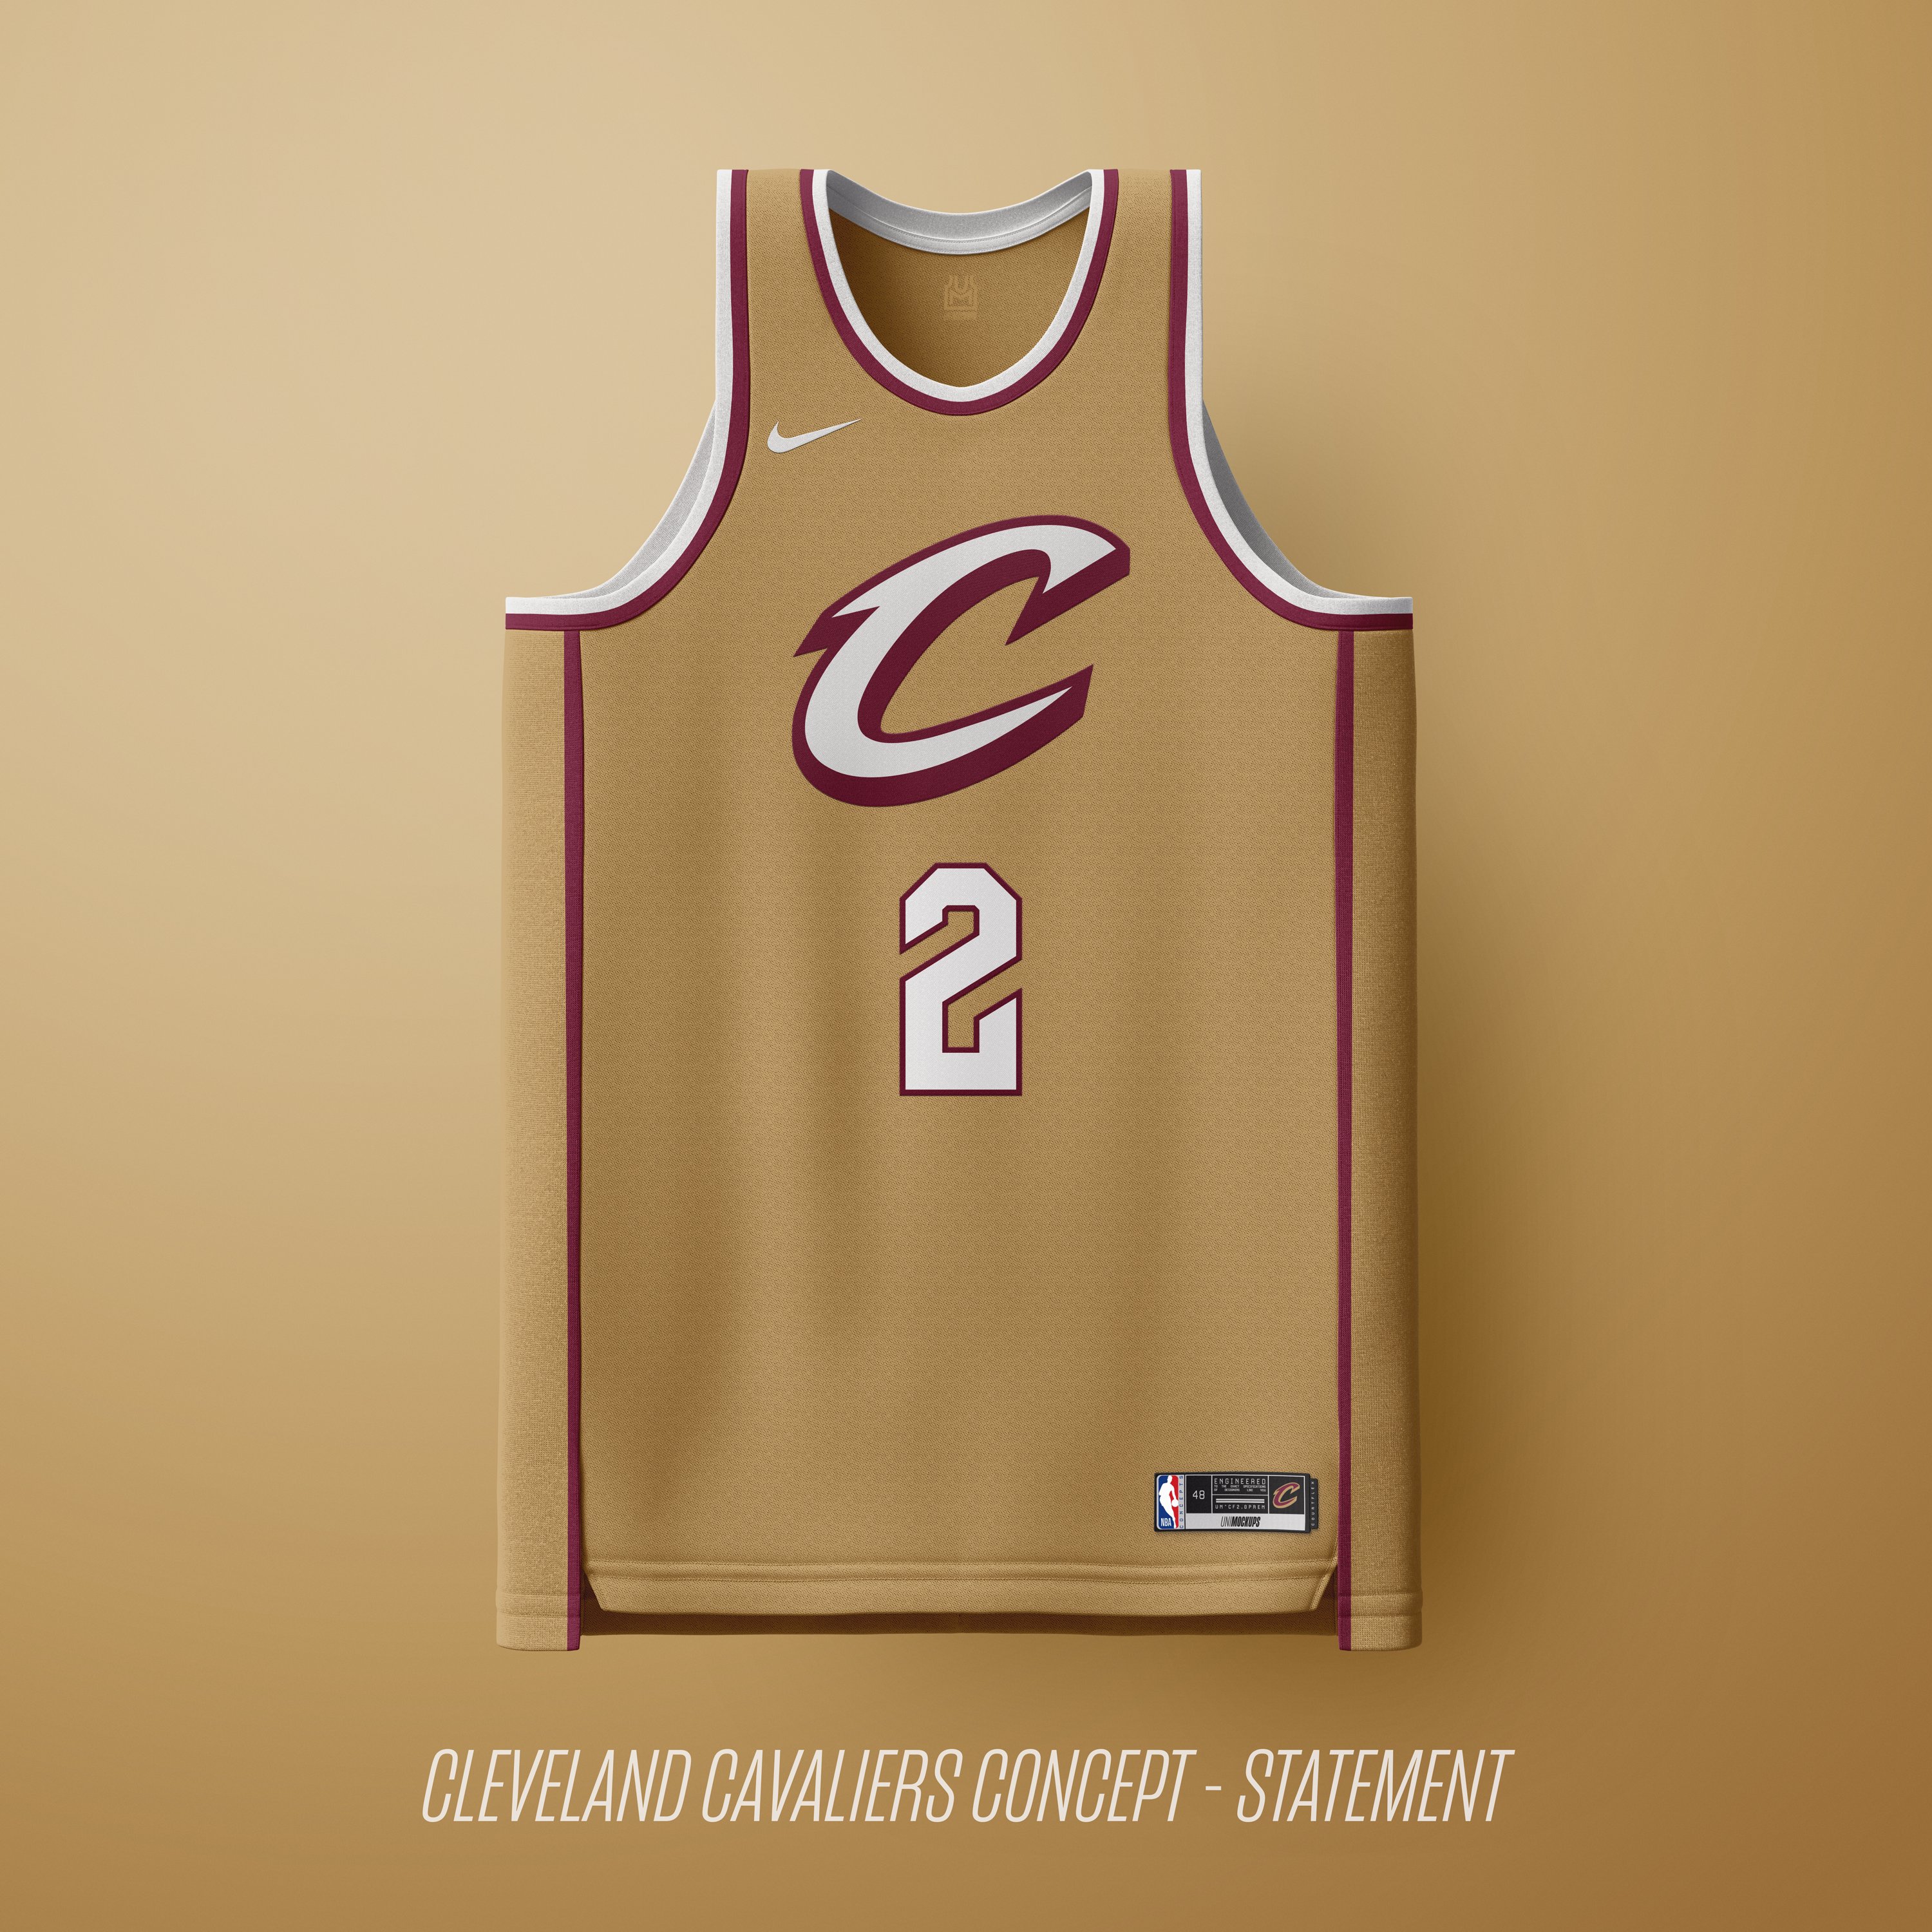 Twitter Speaks Out on Cavaliers New Black Sleeved Jersey Uniforms